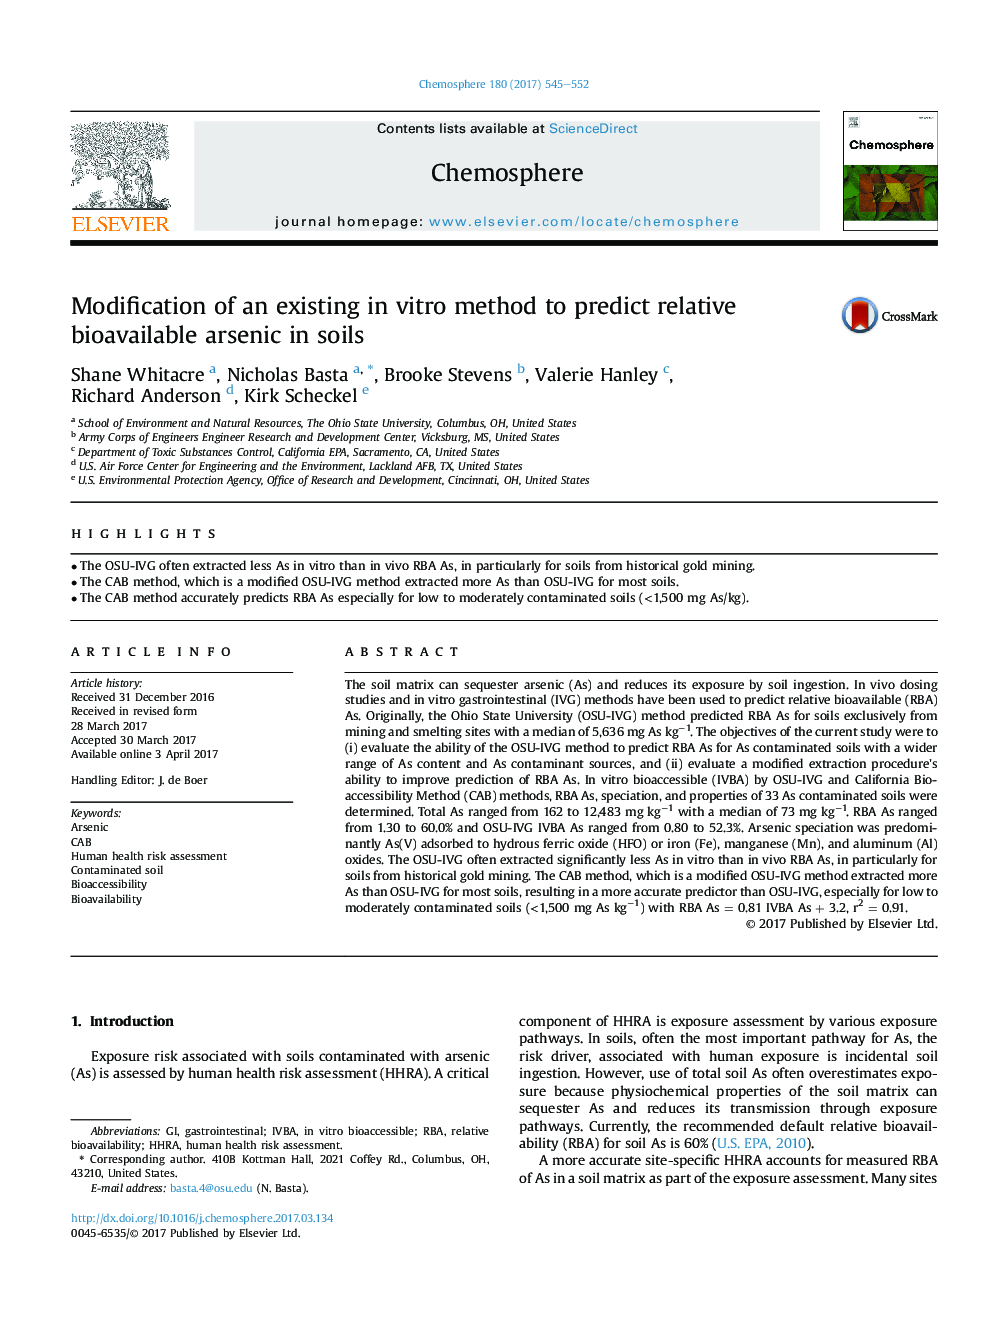 Modification of an existing inÂ vitro method to predict relative bioavailable arsenic in soils